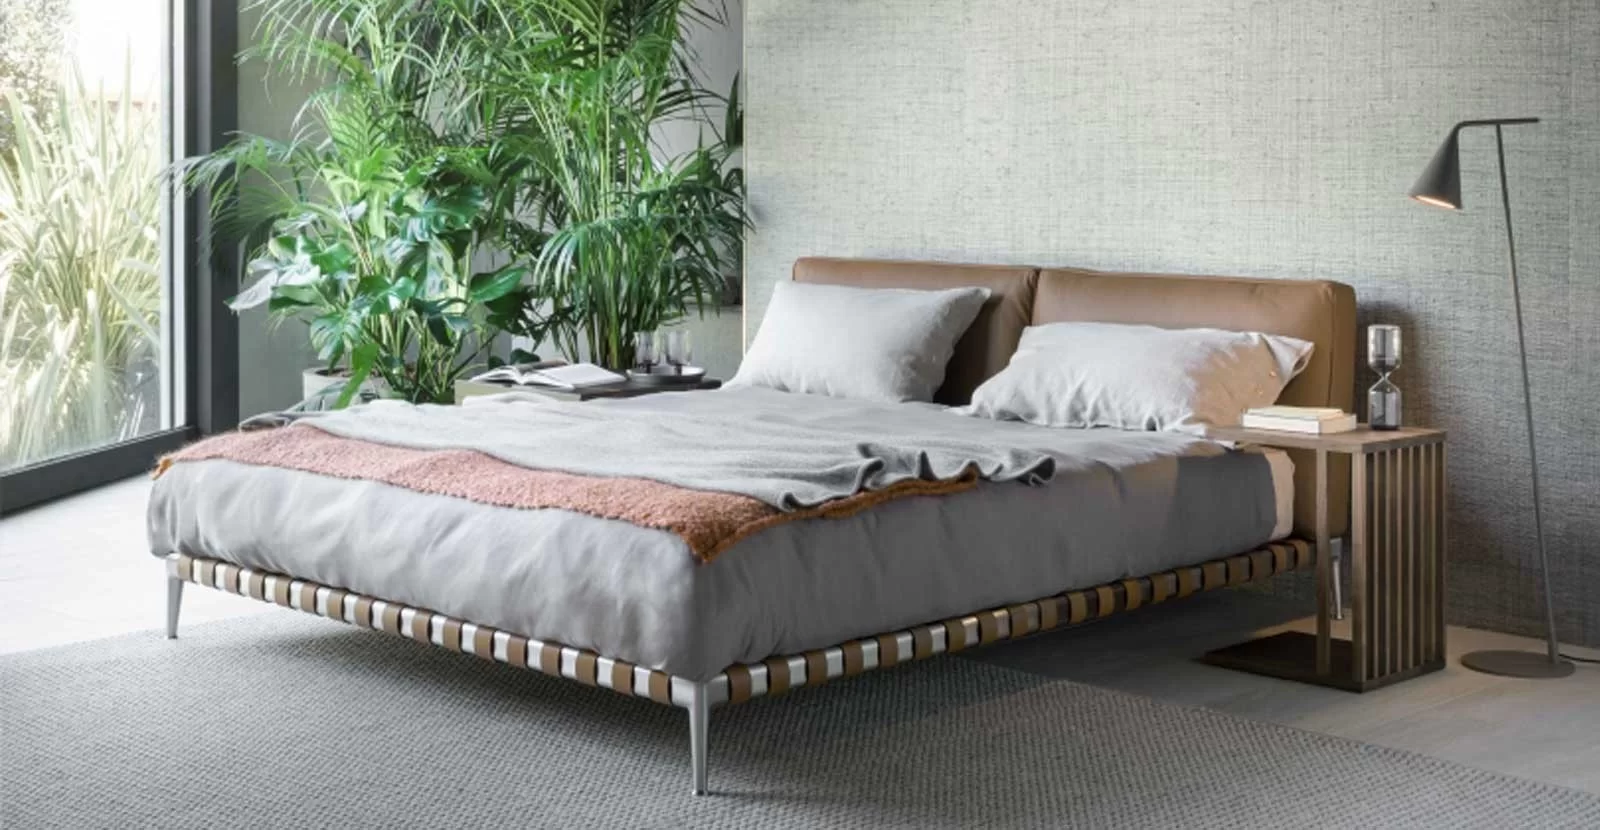 Find the best Made in Italy beds on Mobilificio Marchese